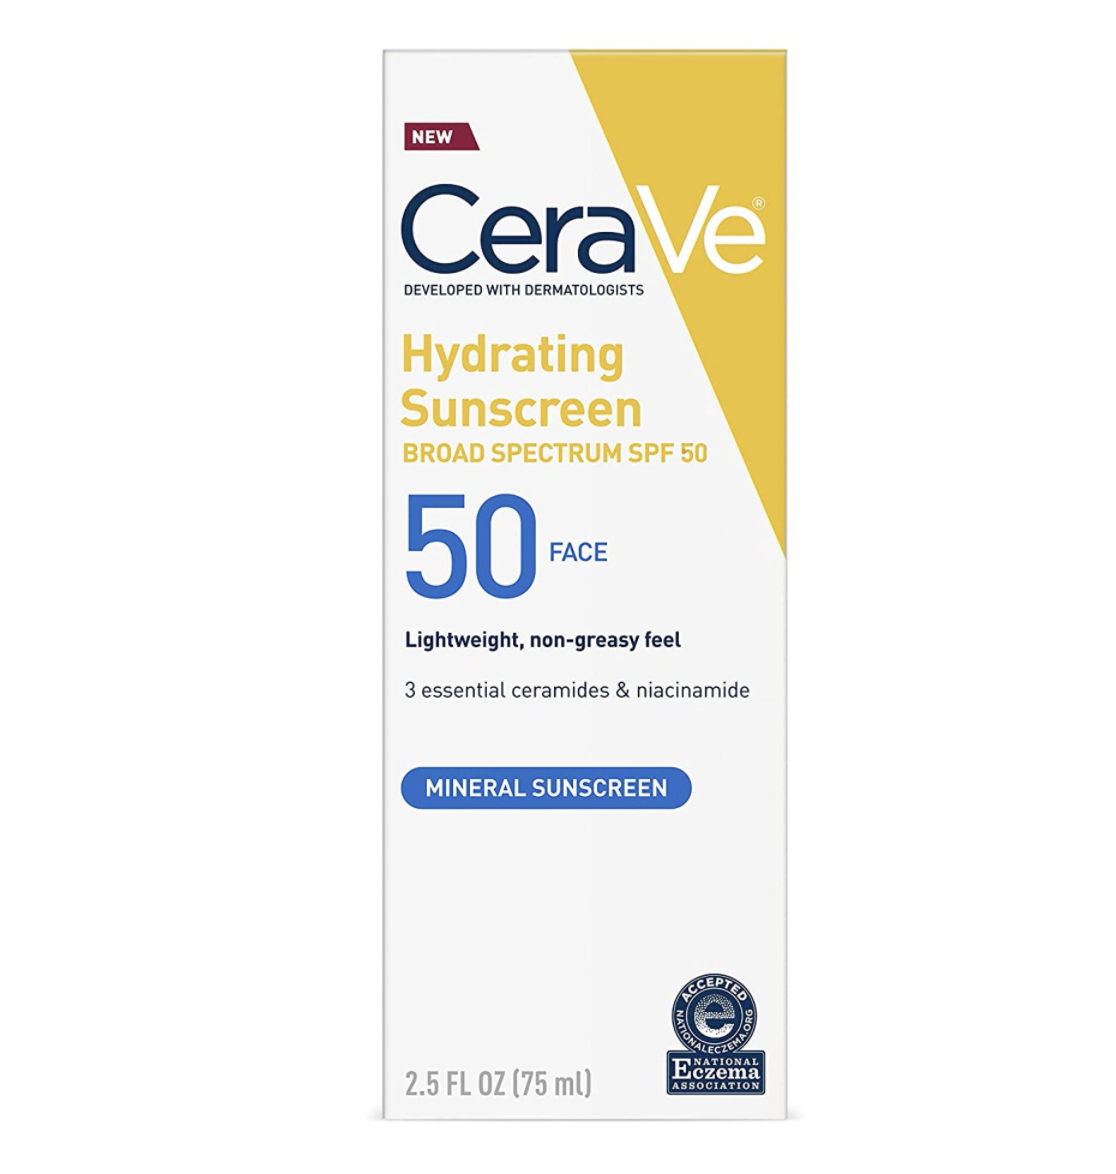 CeraVe Hydrating Mineral Sunscreen SPF 50 Face Lotion 2.5 fl oz - $23.99